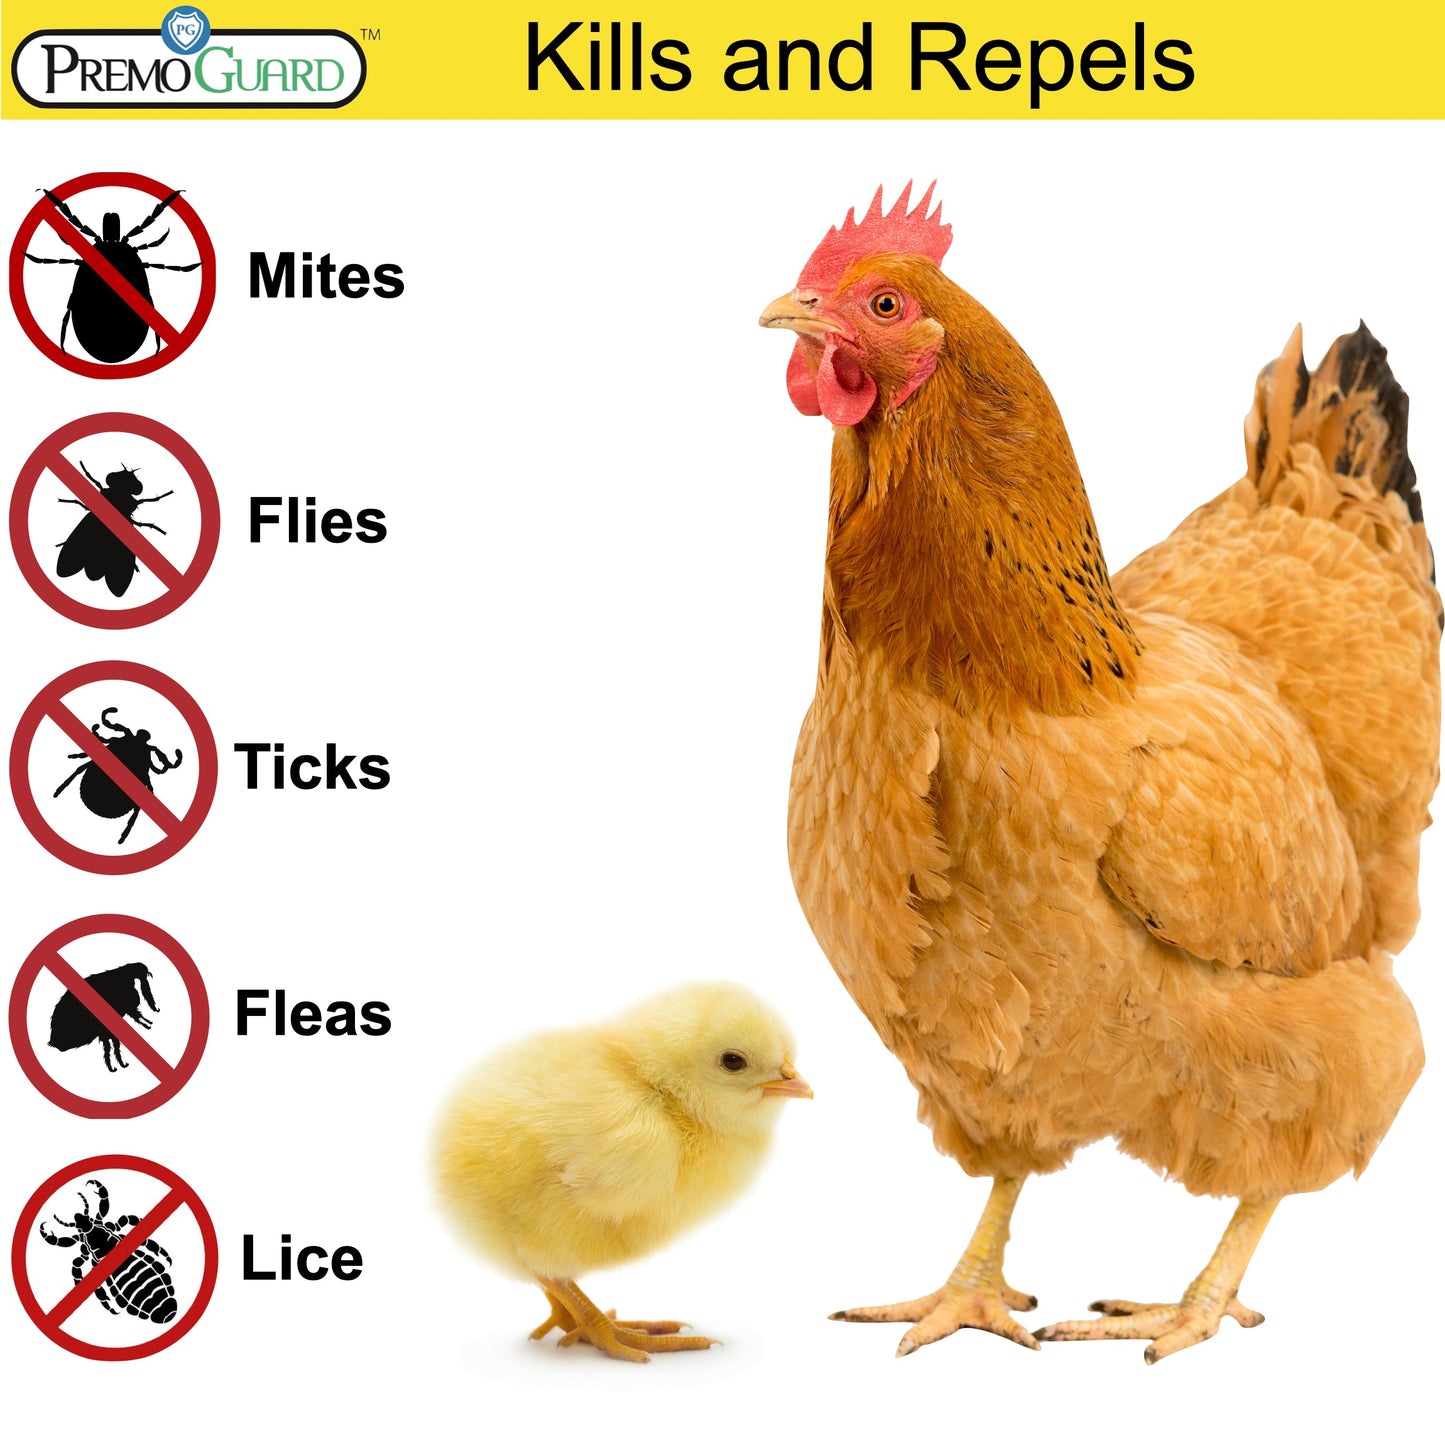 Premo Guard Poultry Spray kills and repels pests.